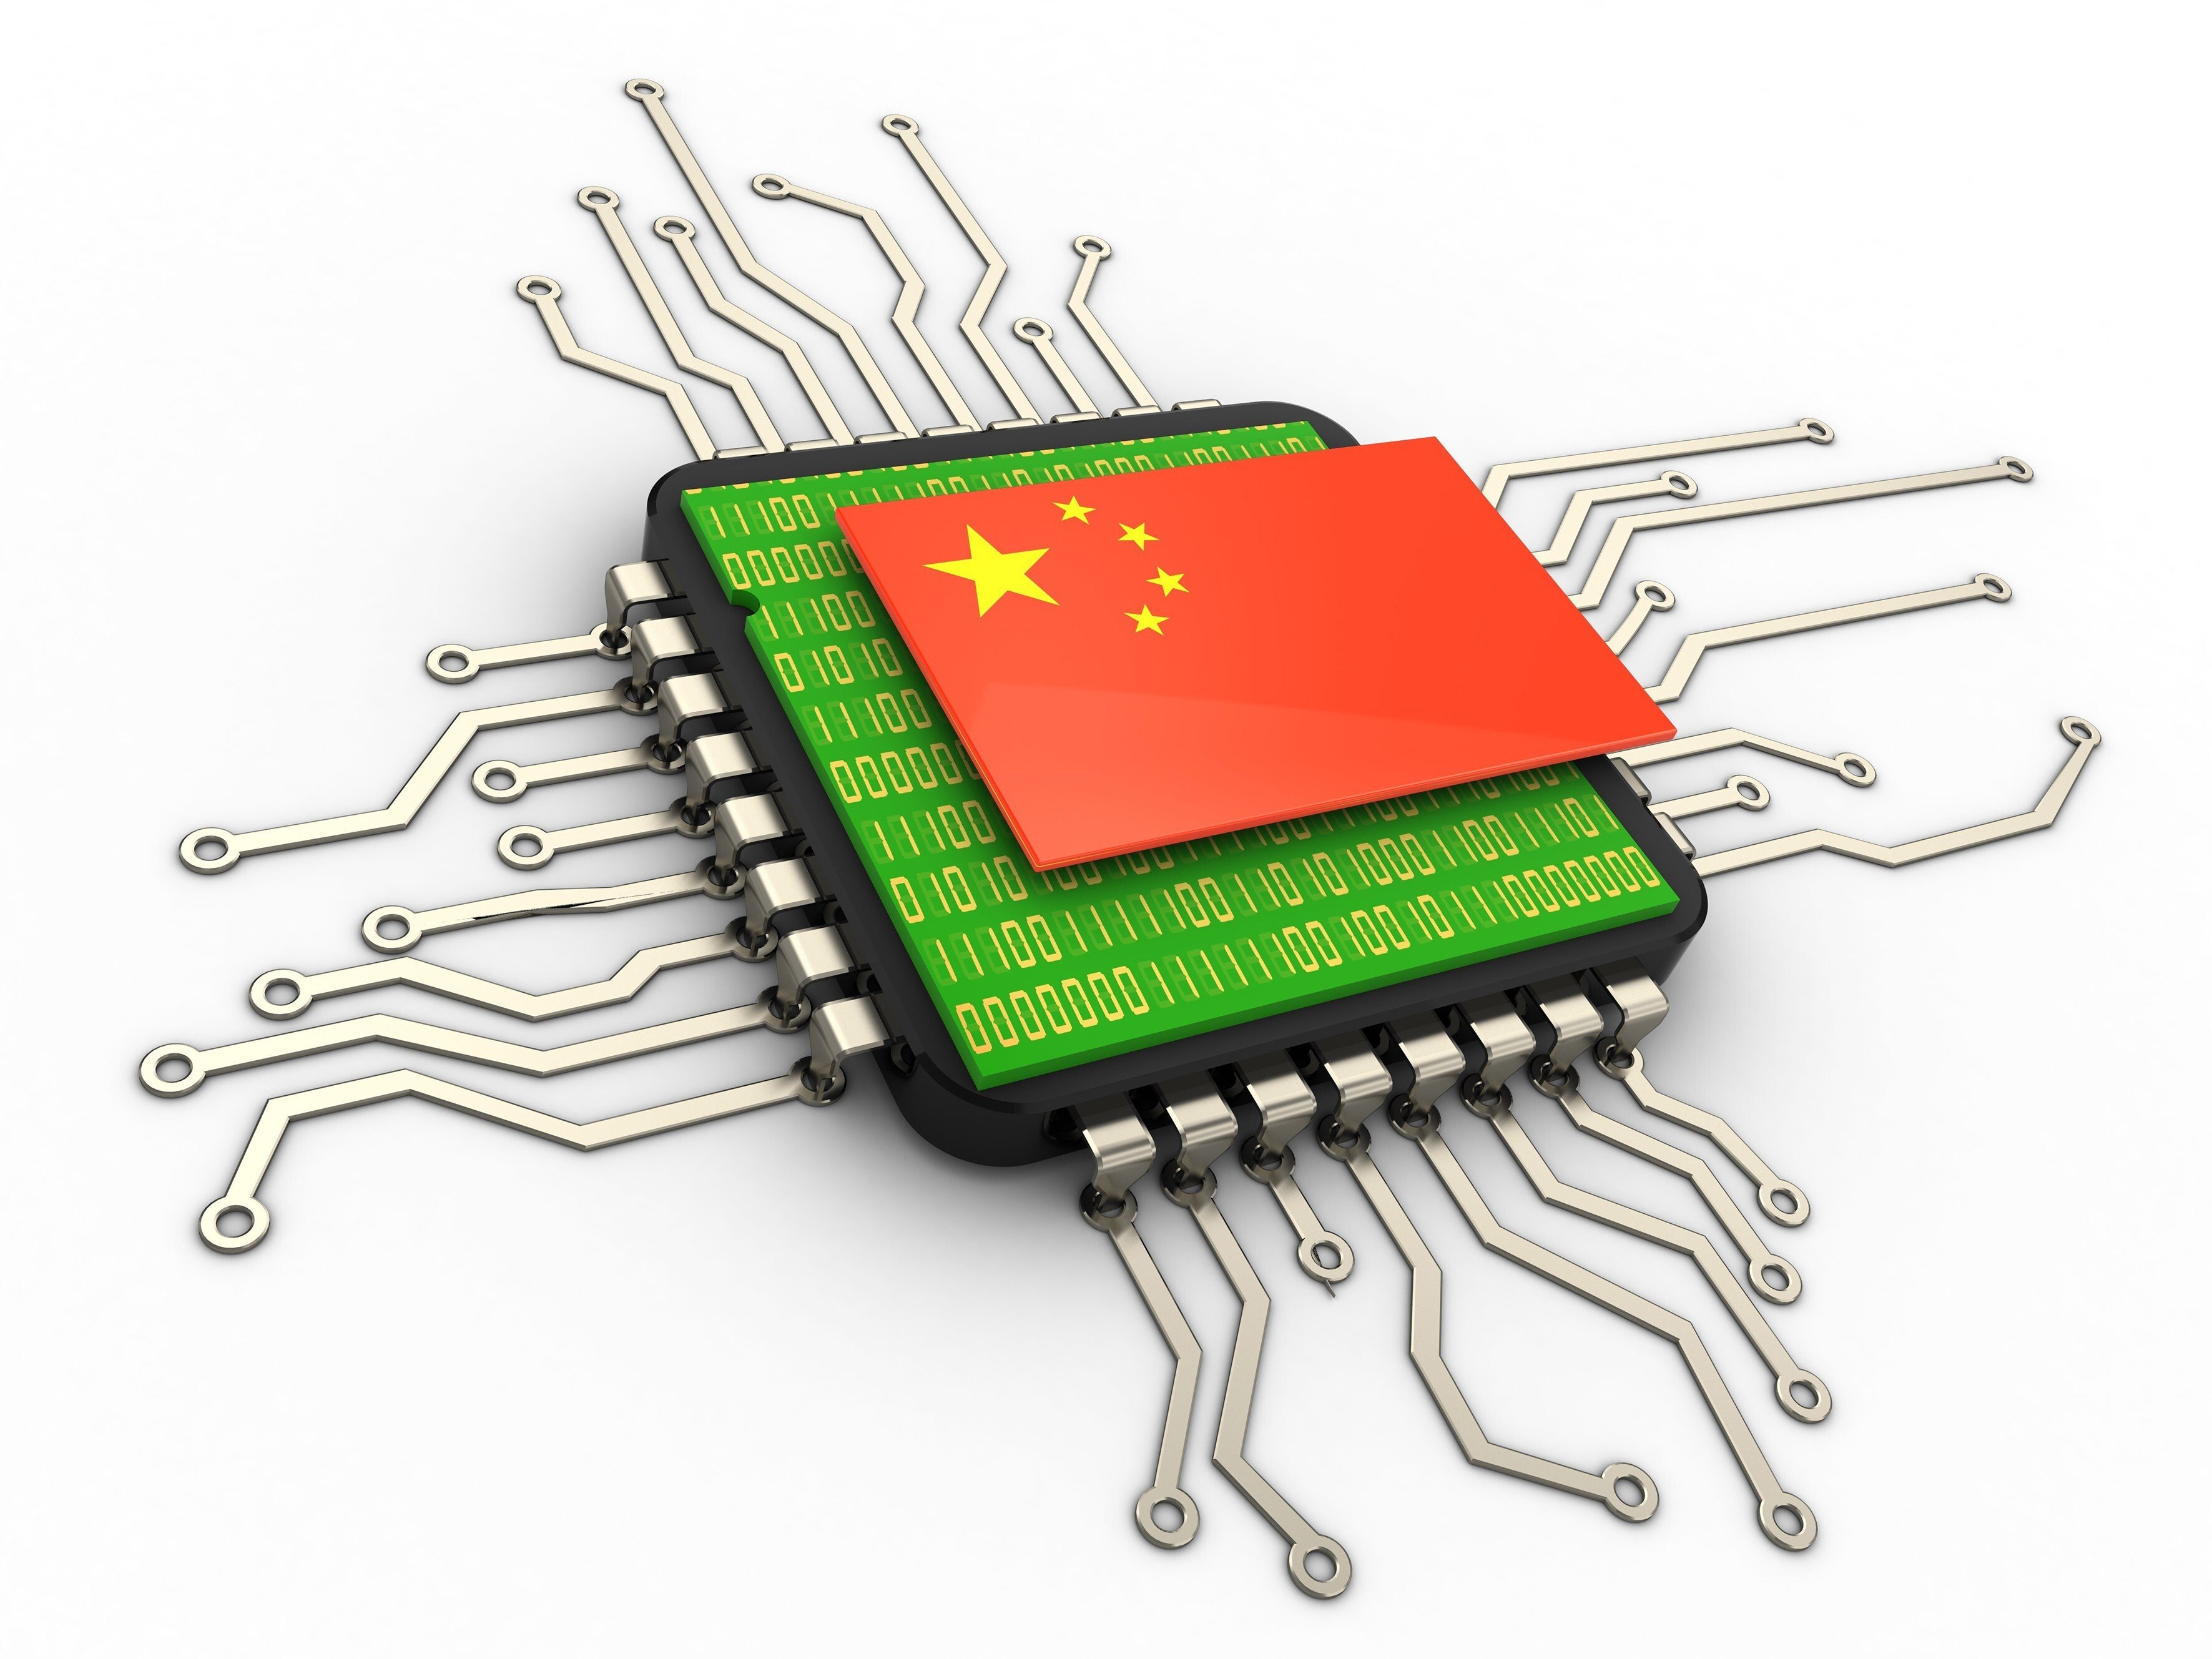 If China overcomes the odds and succeeds in its quest for chip self-sufficiency, it will shift the global balance of power. Photo: Shutterstock